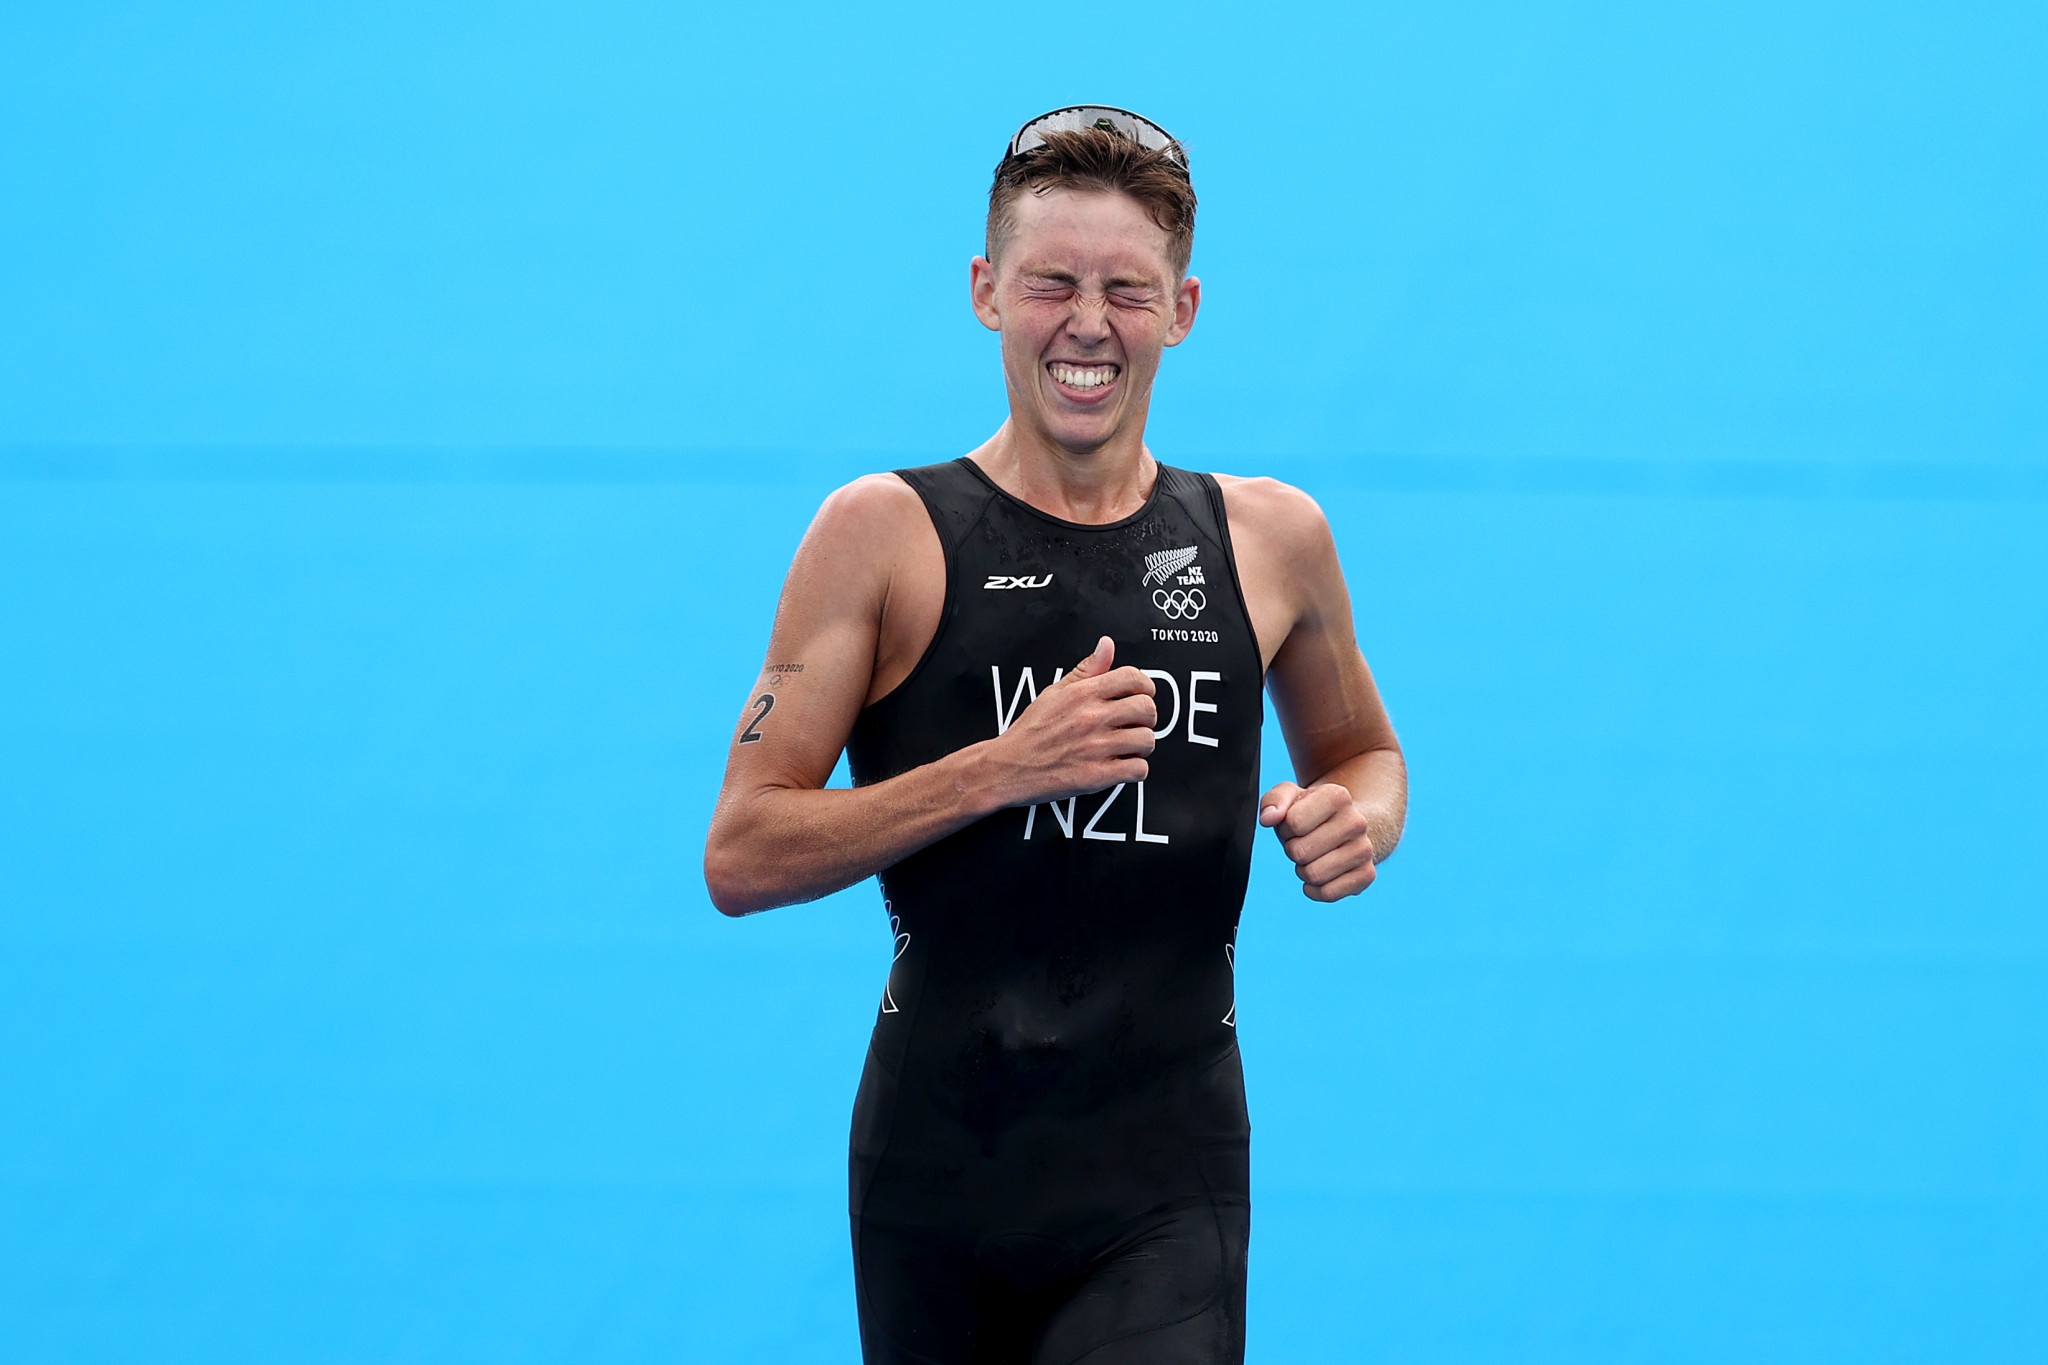 Olympic bronze medallist Hayden Wilde has continued in fine form approaching Birmingham 2022 ©Getty Images